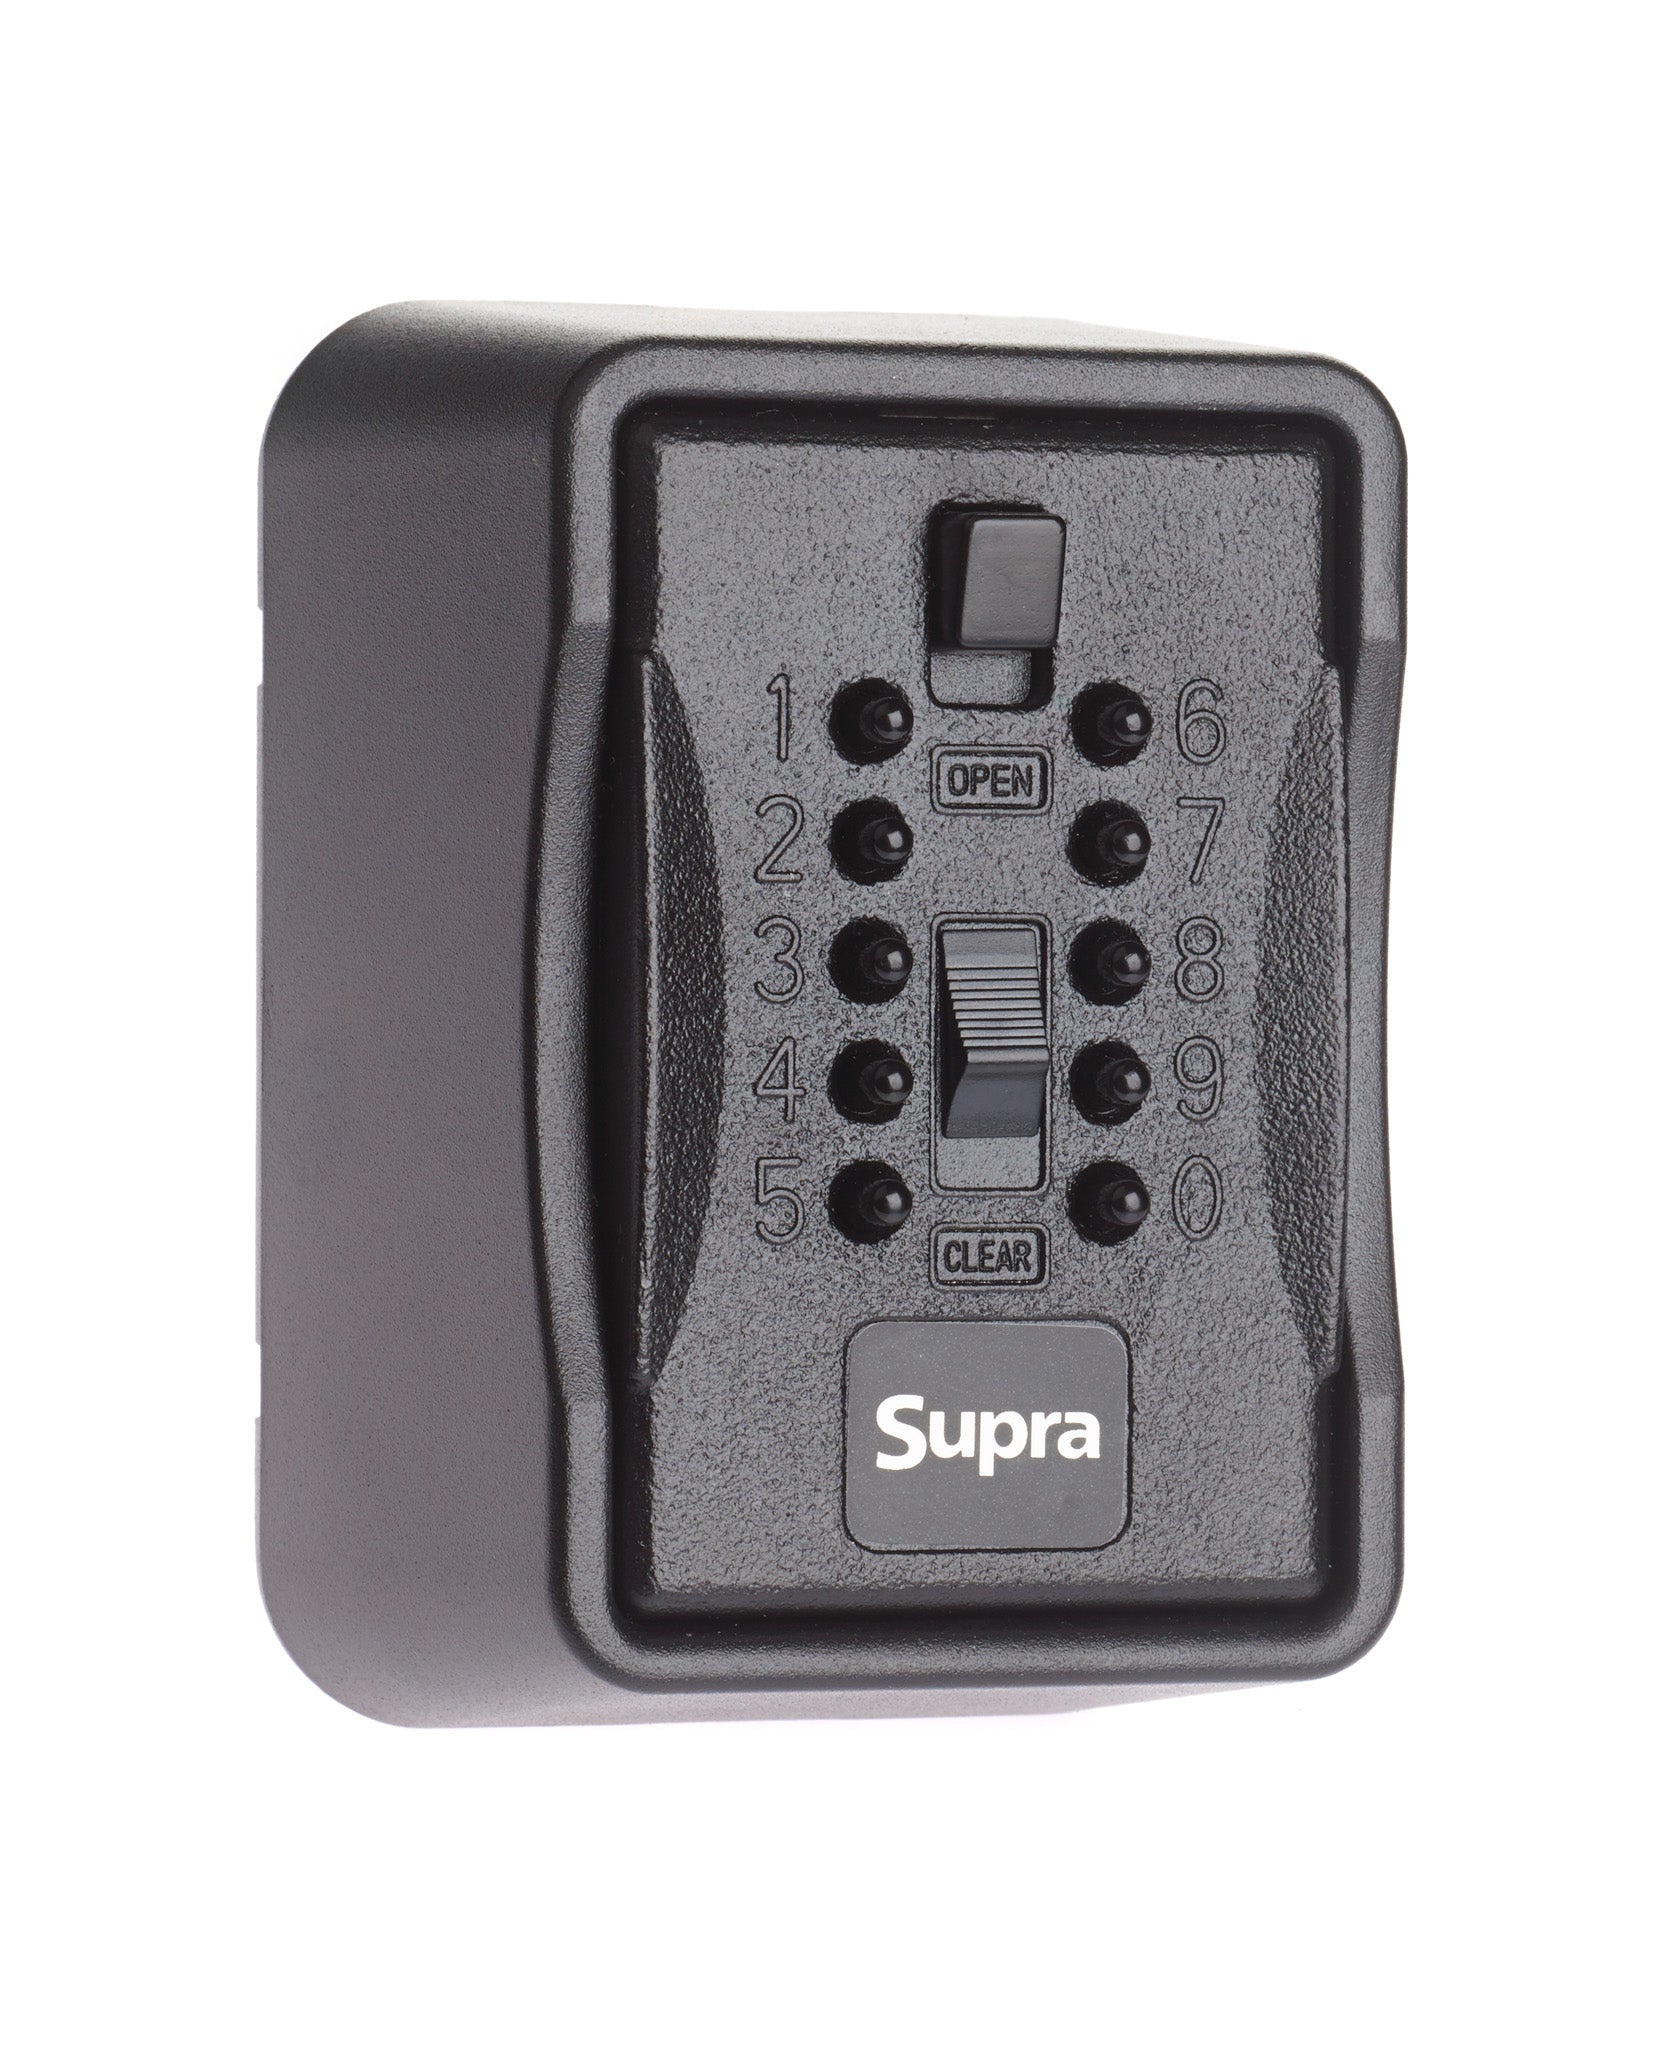 Large Supra S7 big box key safe in black made from zinc alloy